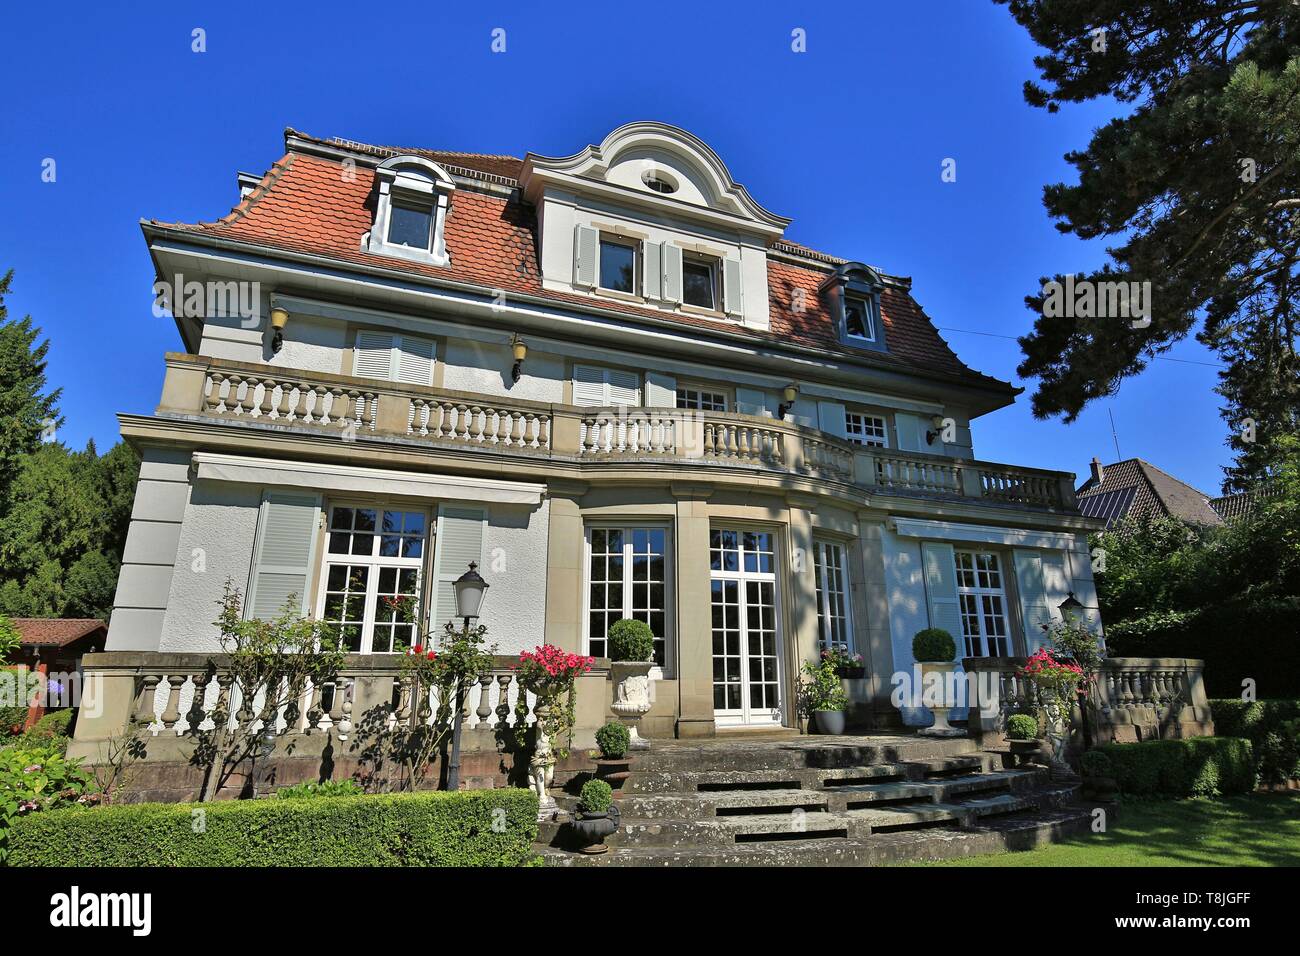 France, Haut Rhin, Mulhouse, Architectural style house typical of the Rebberg hill on the heights of Mulhouse Stock Photo